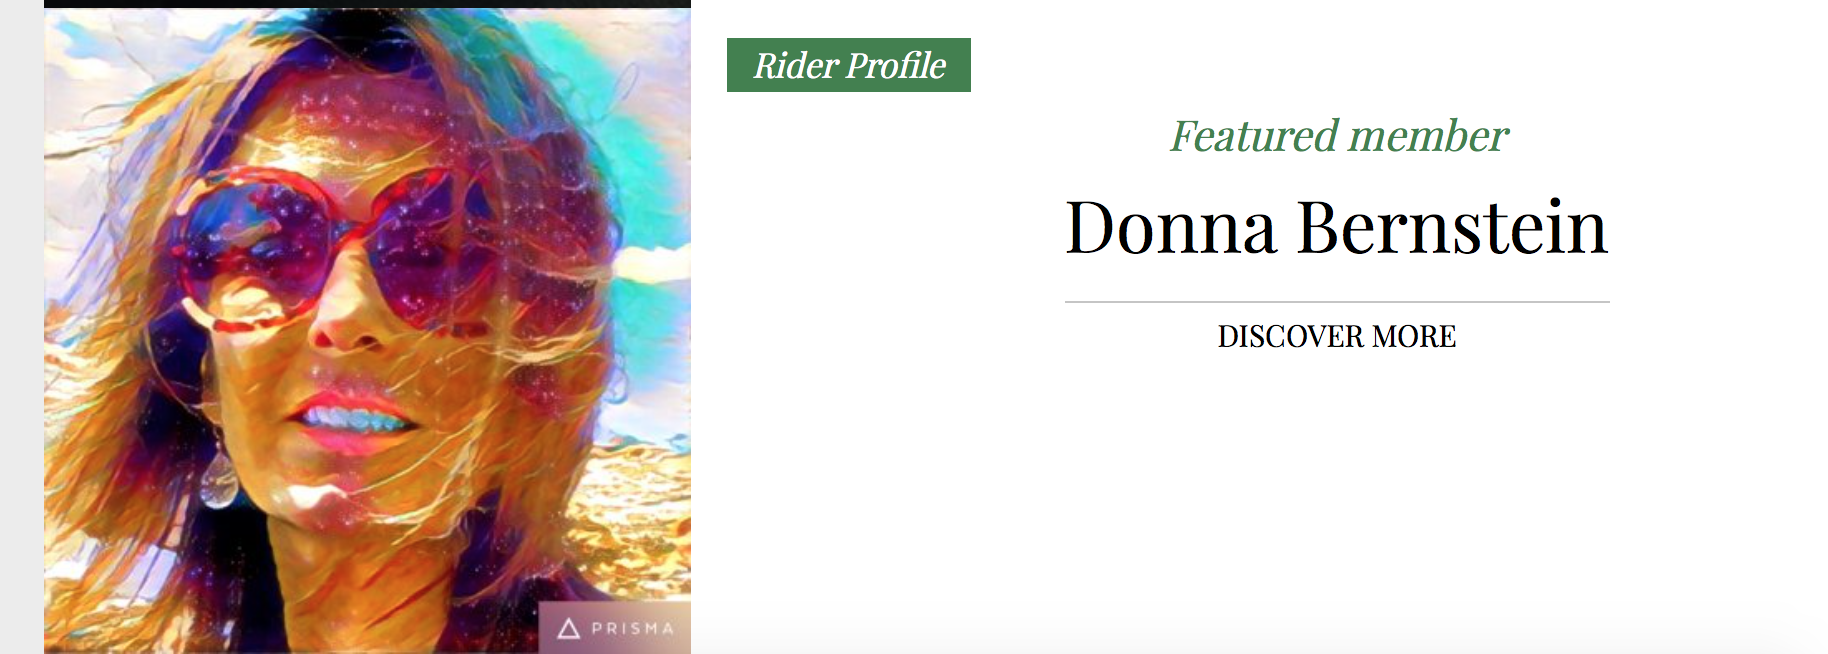 Featured Member Donna B, On HorseRider.com